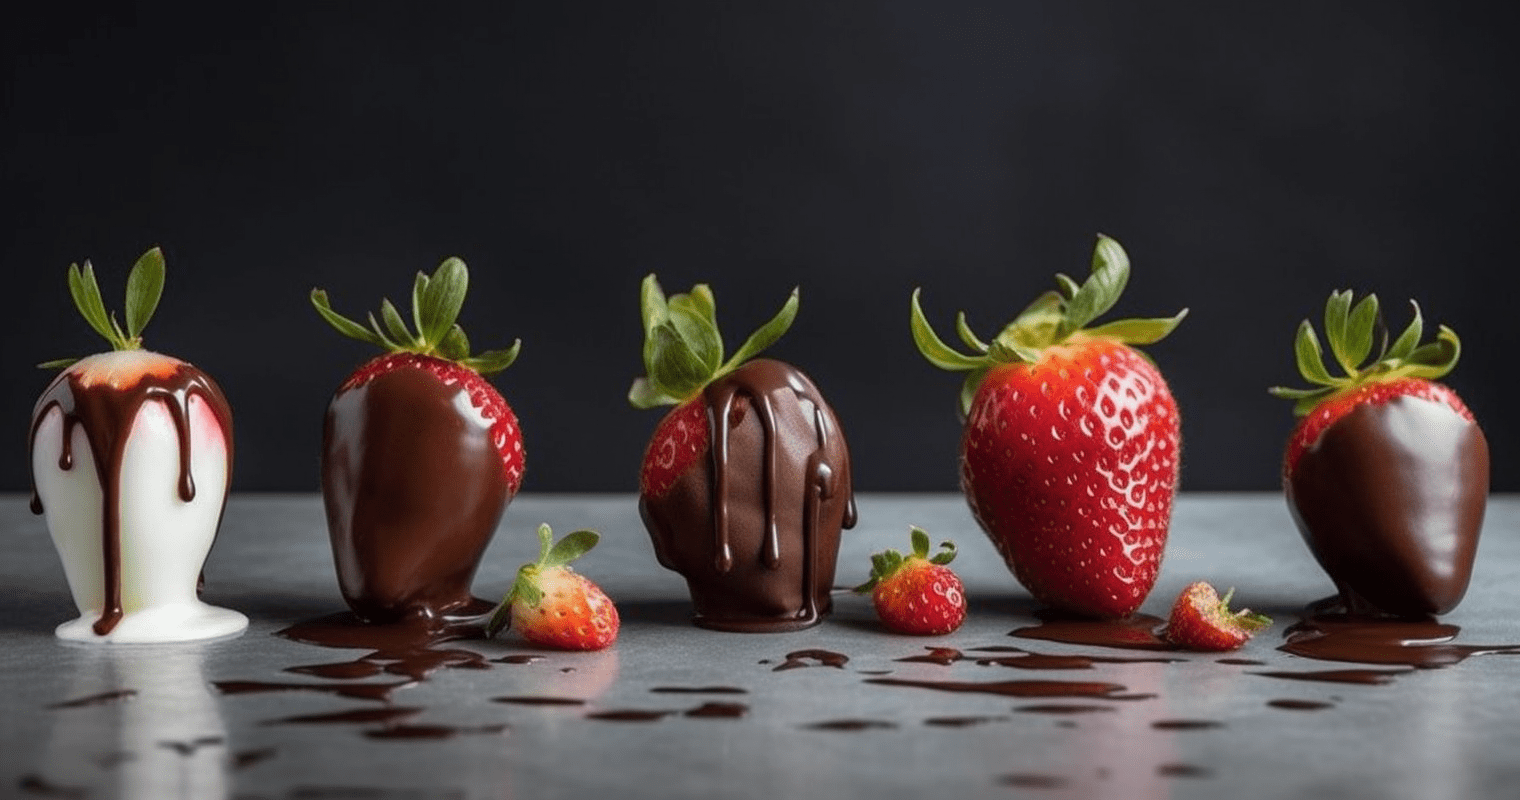 Image of chocolate-covered strawberries